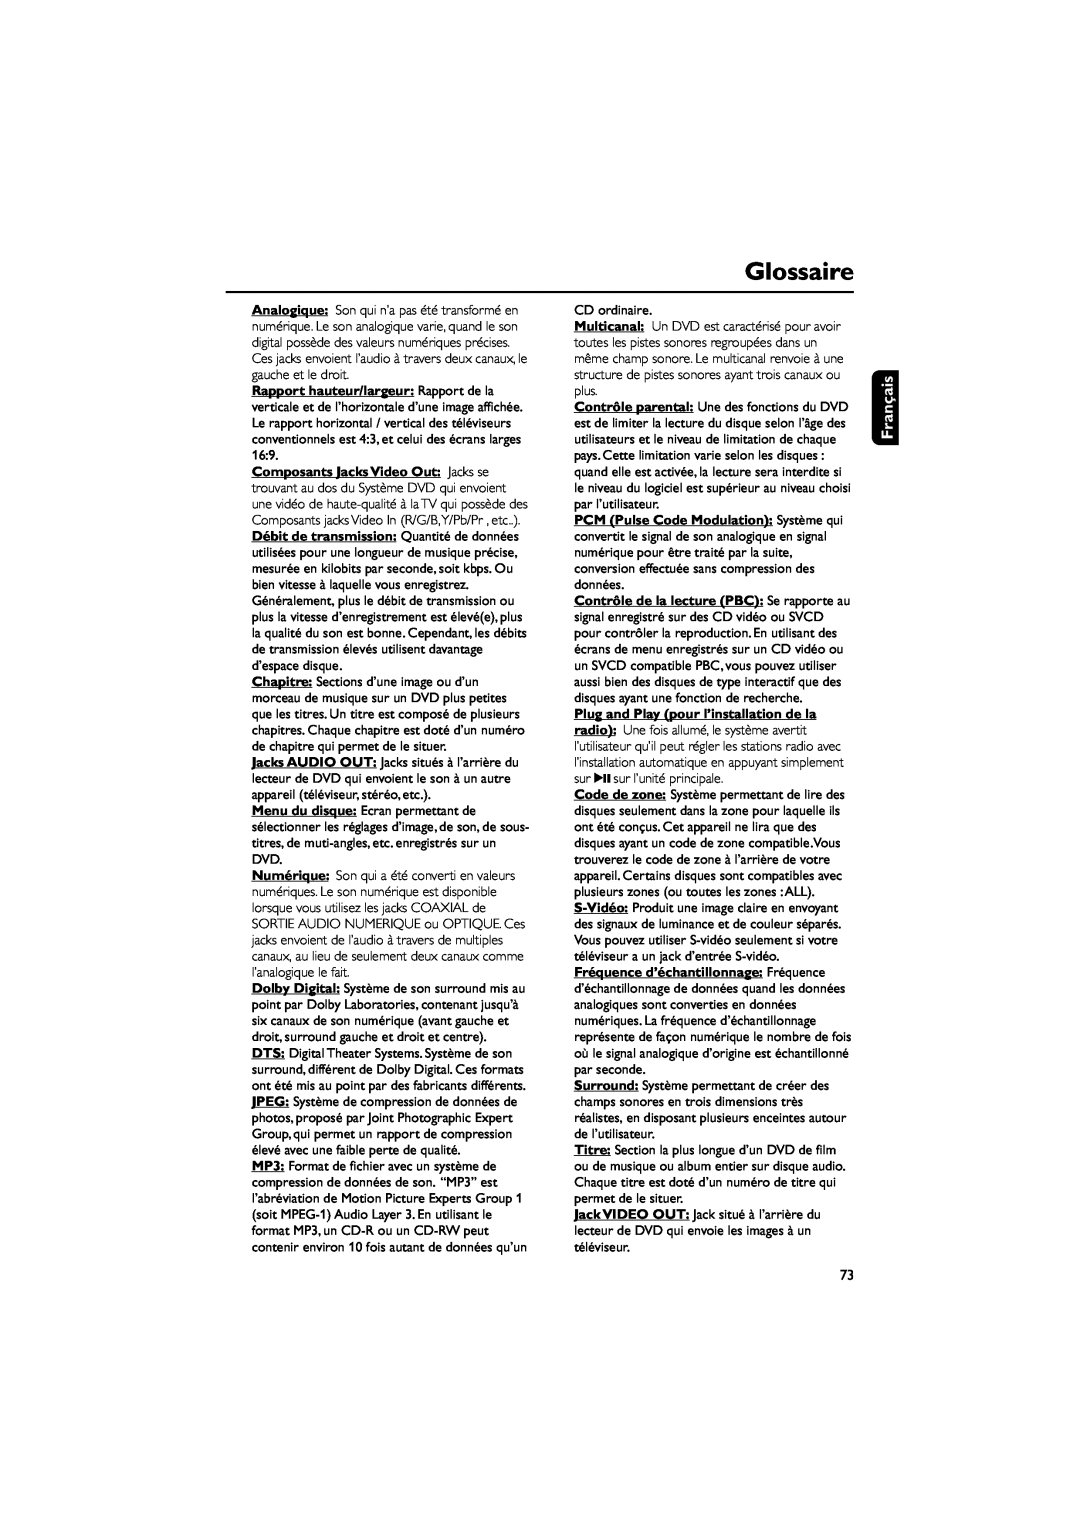 Philips MCD703 owner manual Glossaire, Fran ais 